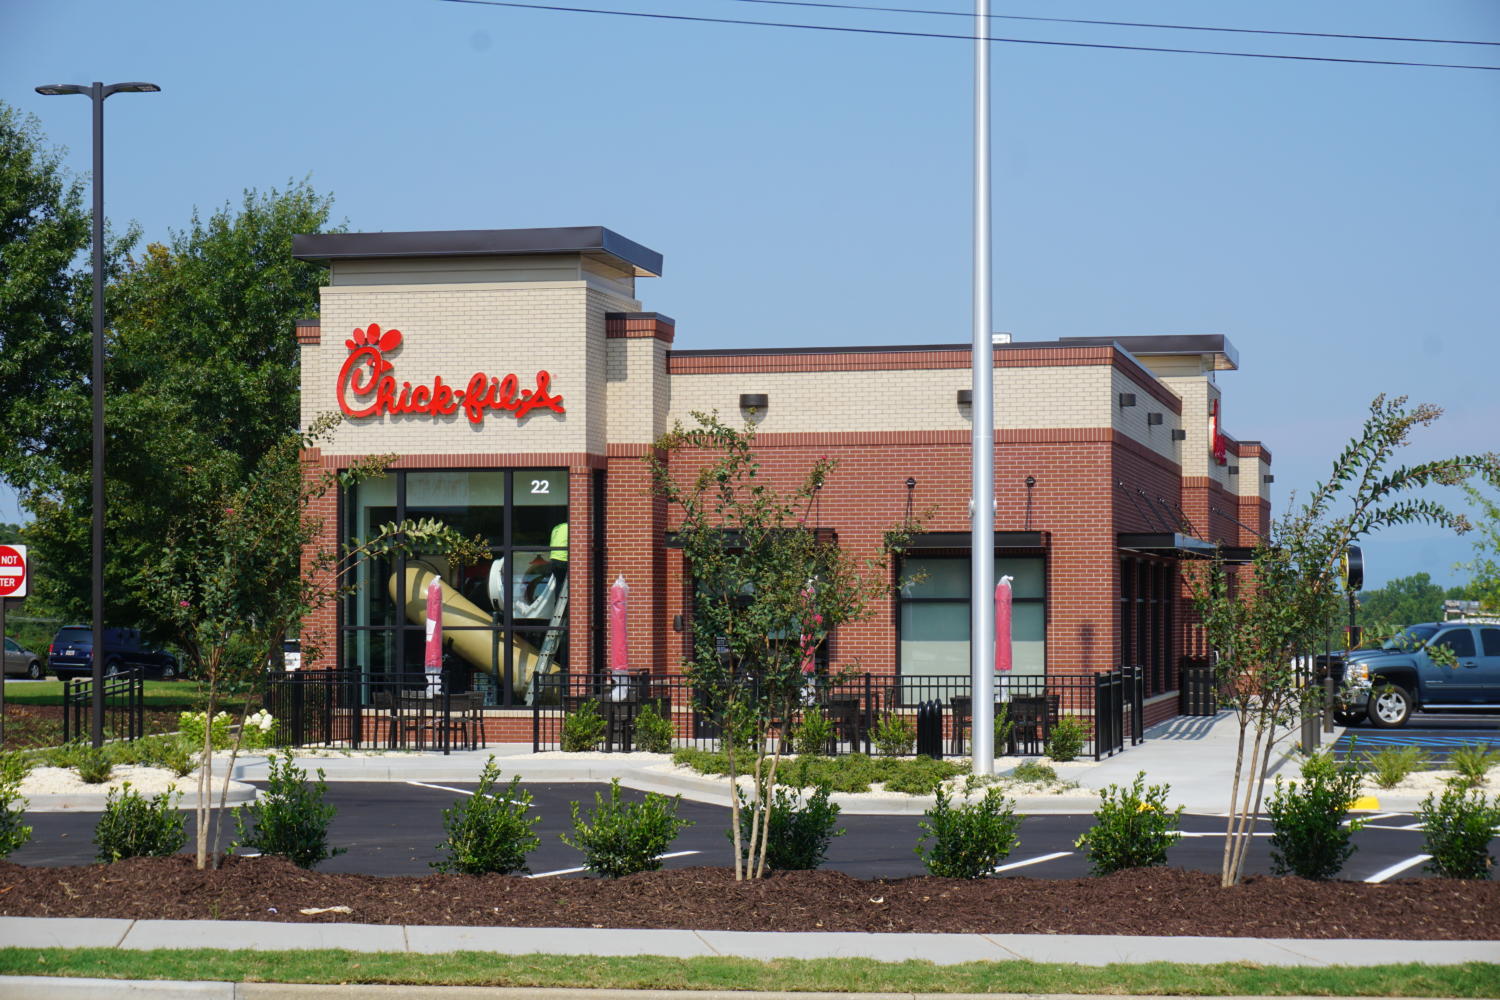 New Chick-Fil-A building in TR